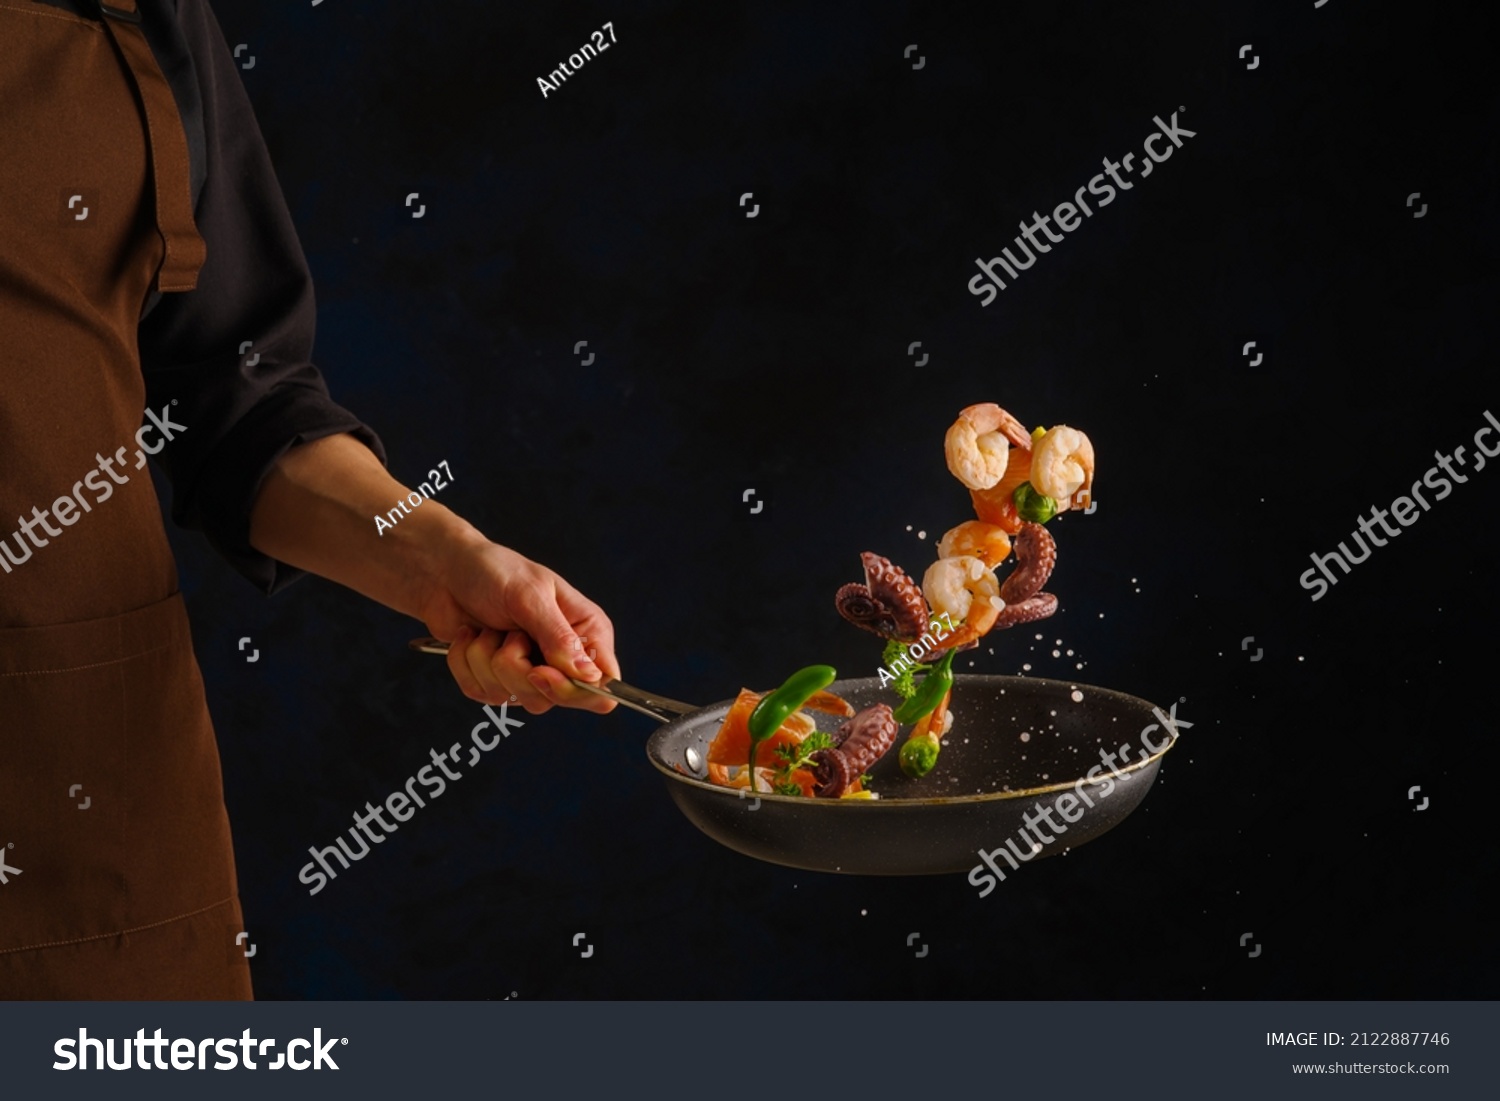 Cooking seafood - shrimp, octopus with vegetables in a frying pan on a black background by a professional chef. Frozen in-flight food. Sea food. Vegetarian, diet food. Banner. #2122887746